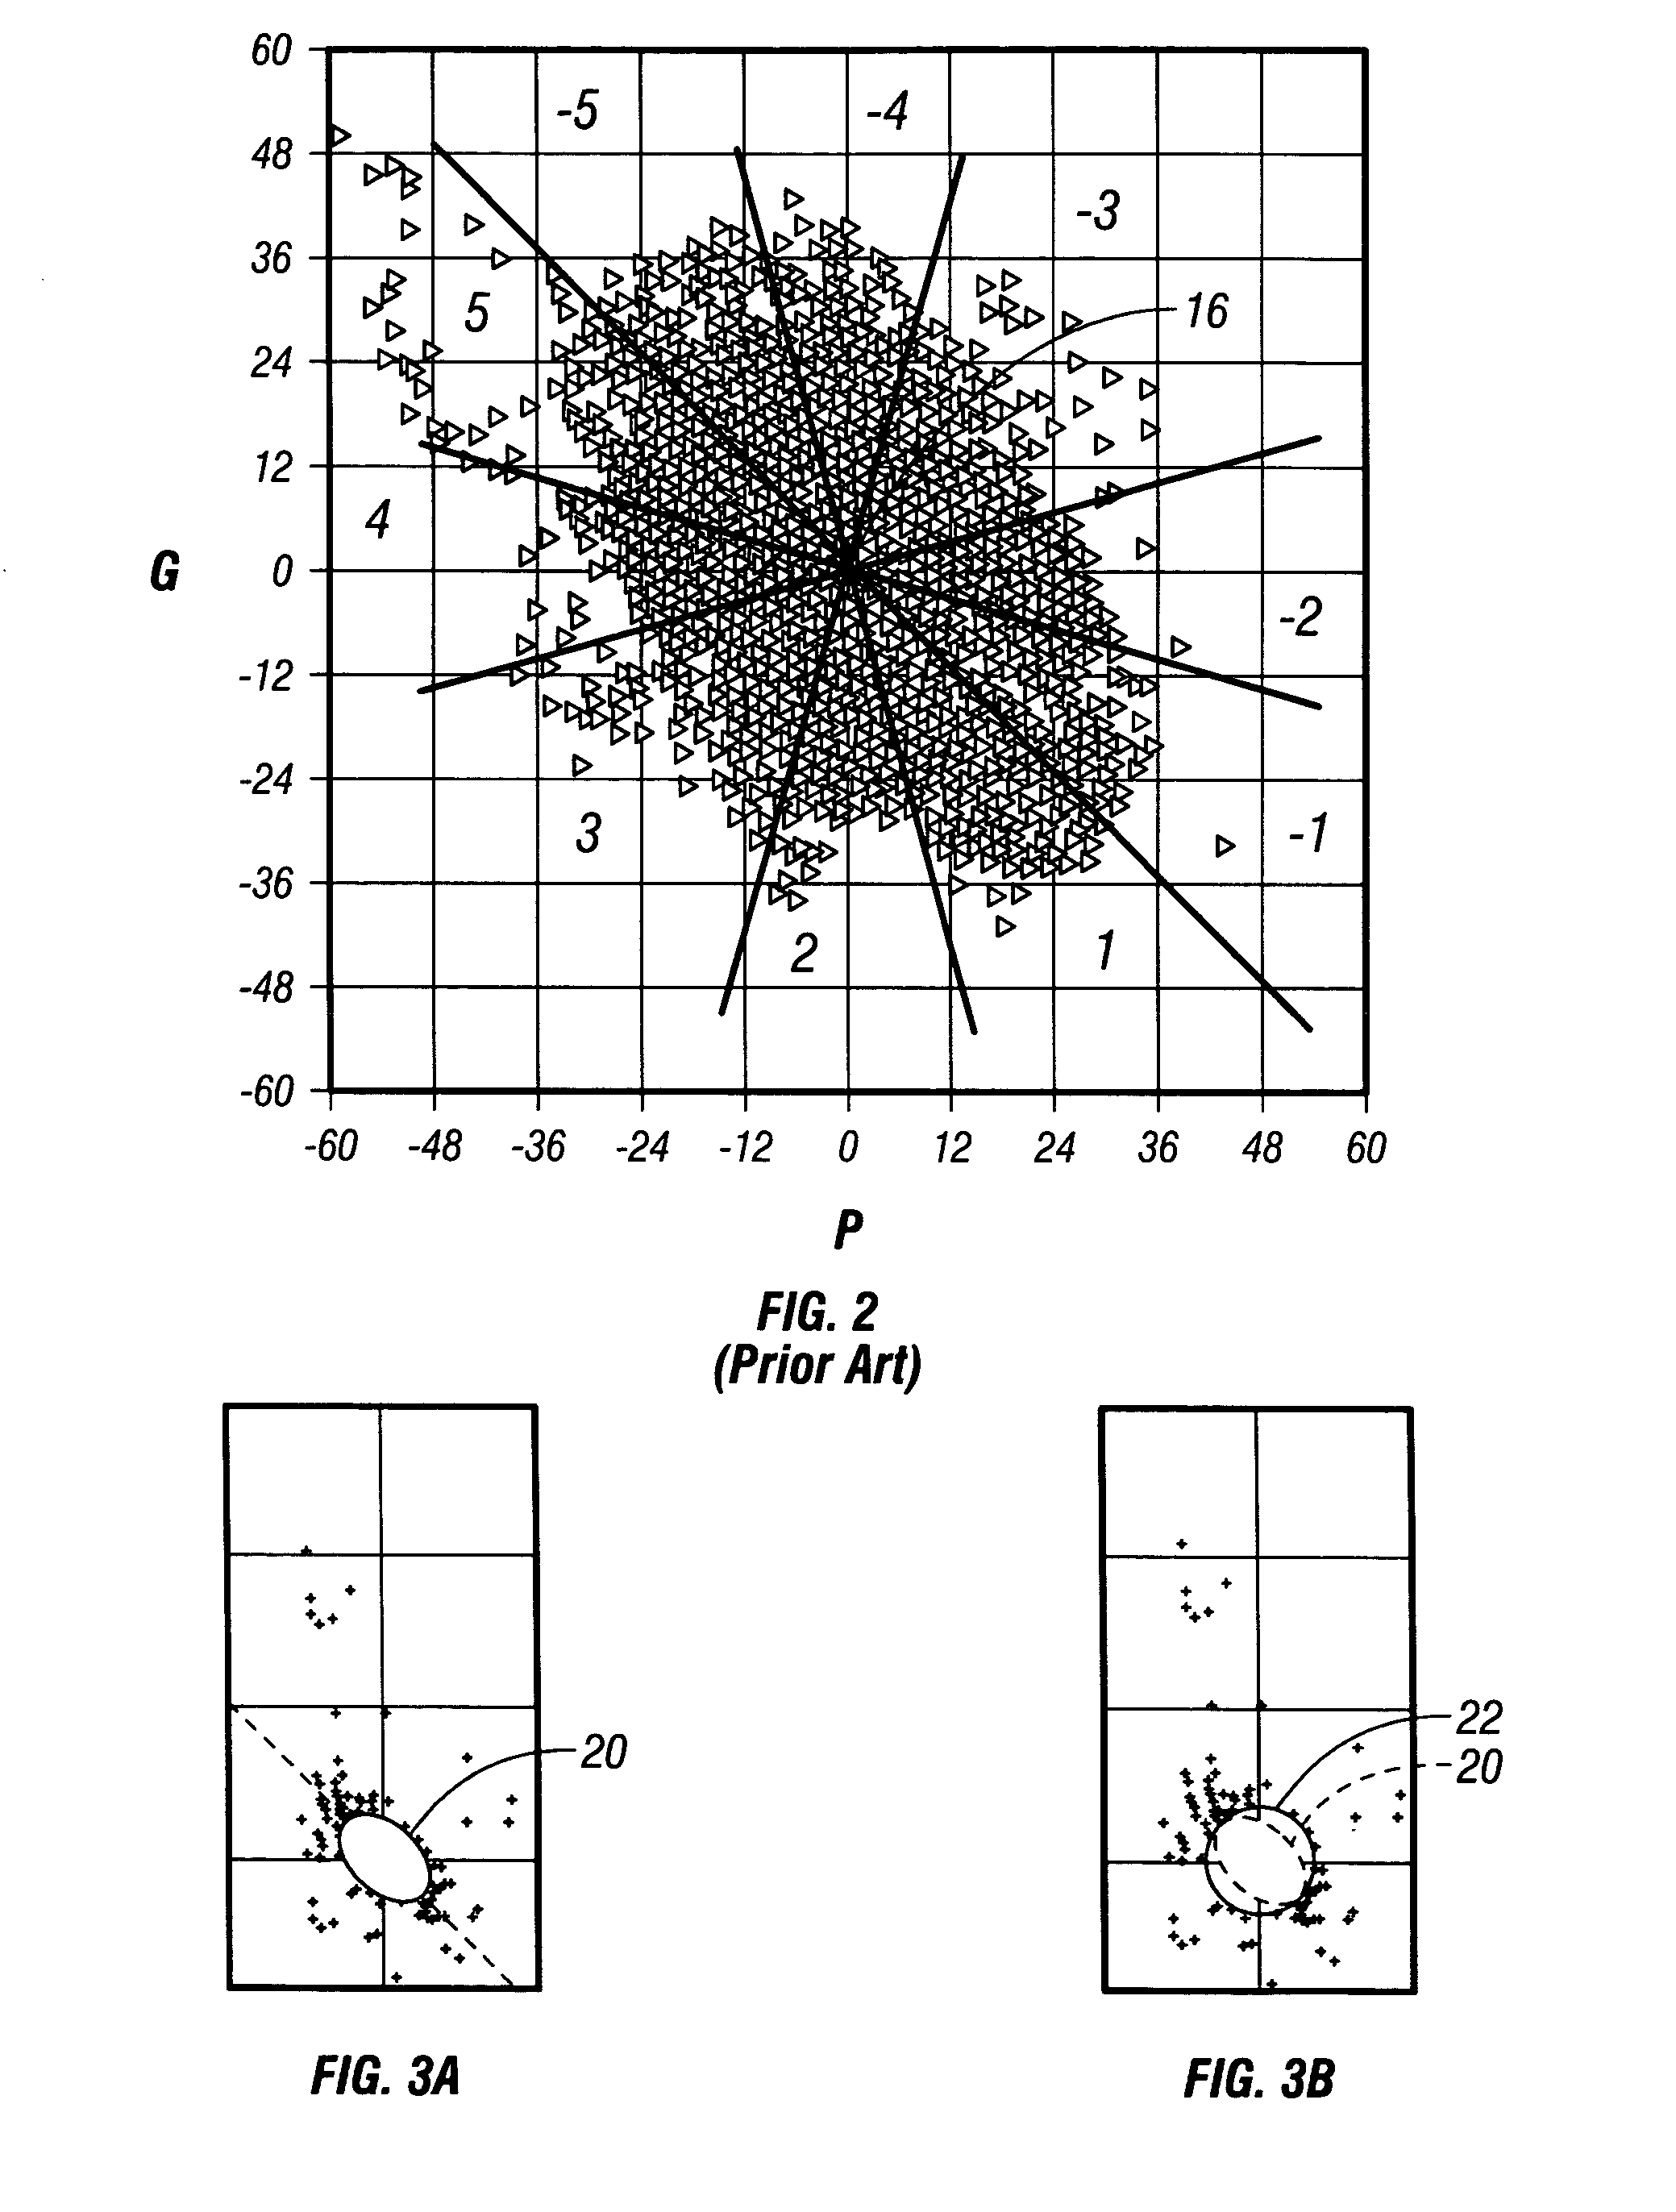 Method of processing seismic data to extract and portray AVO information